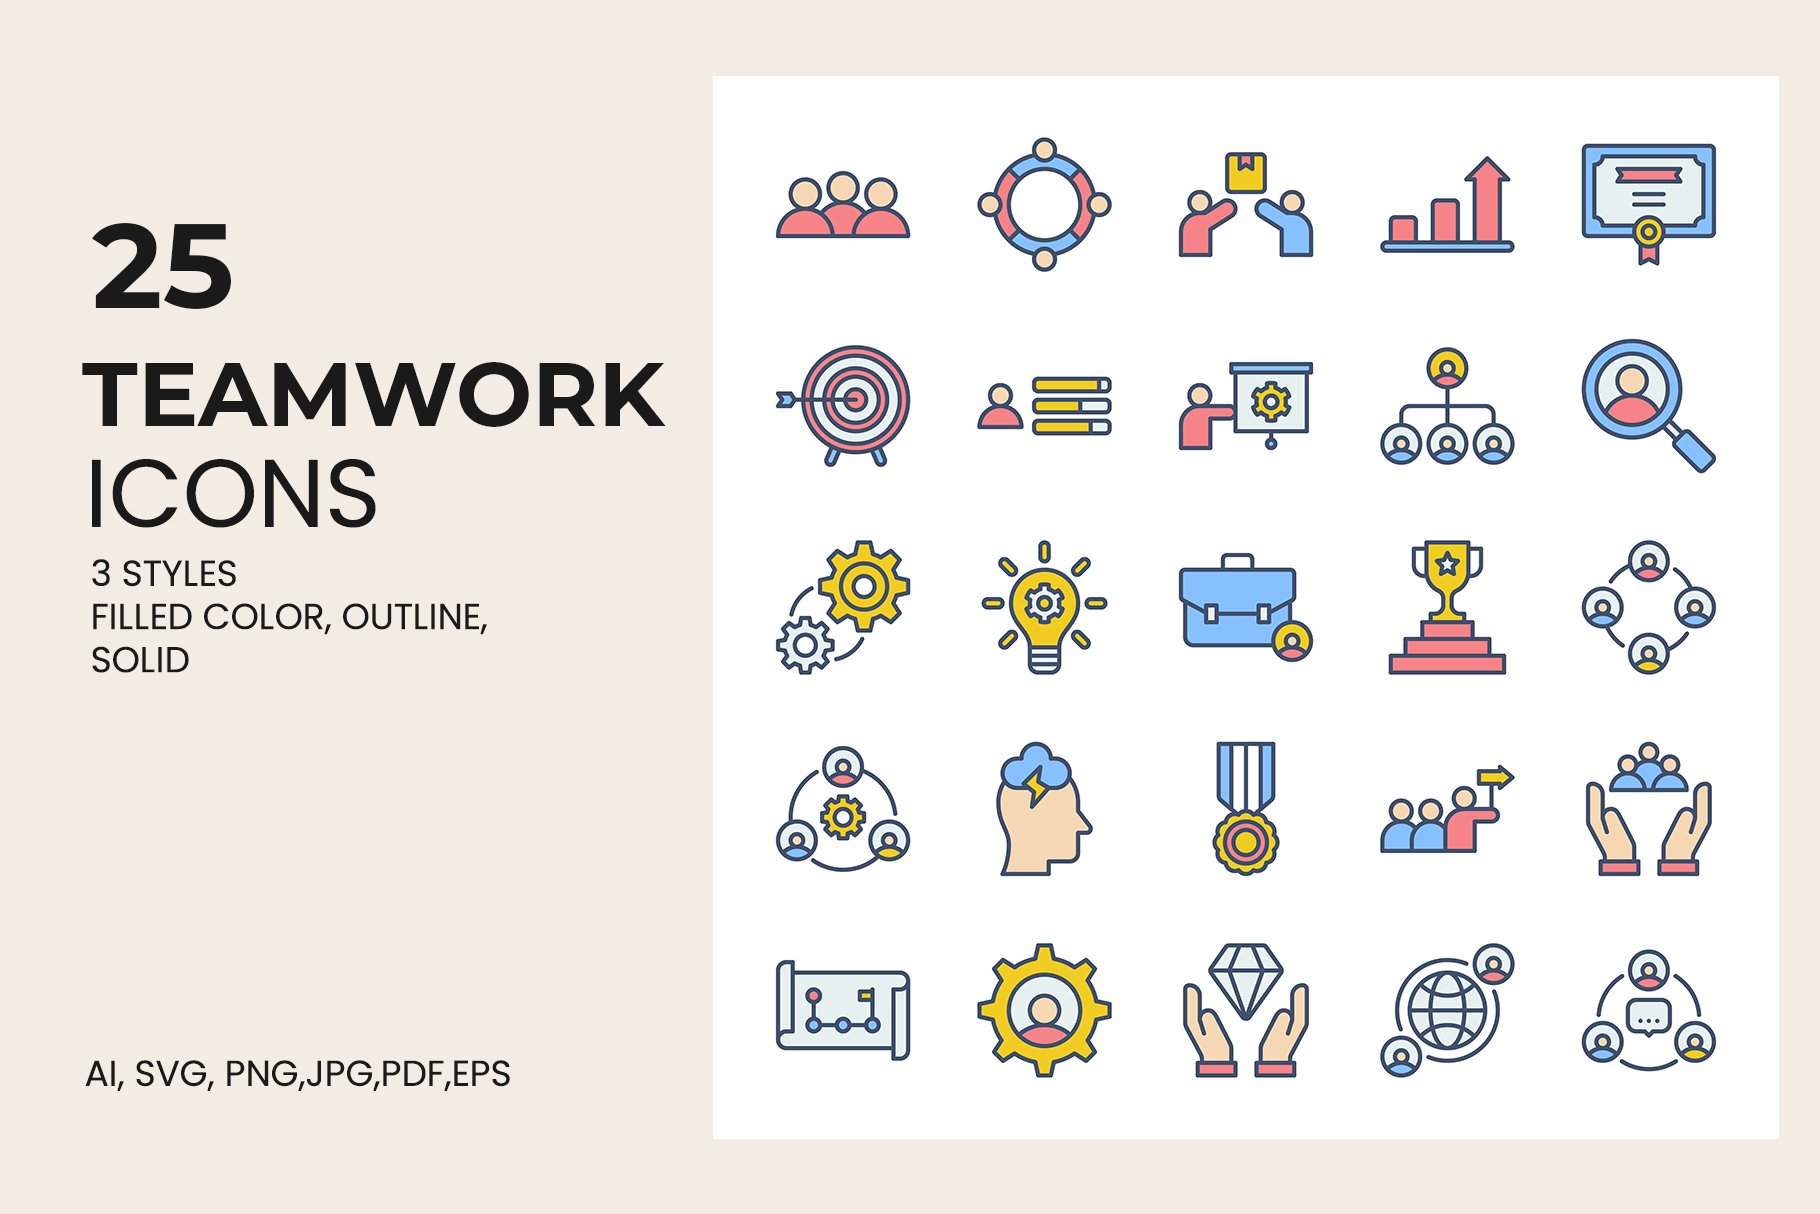 Teamwork Icons 3 Styles cover image.